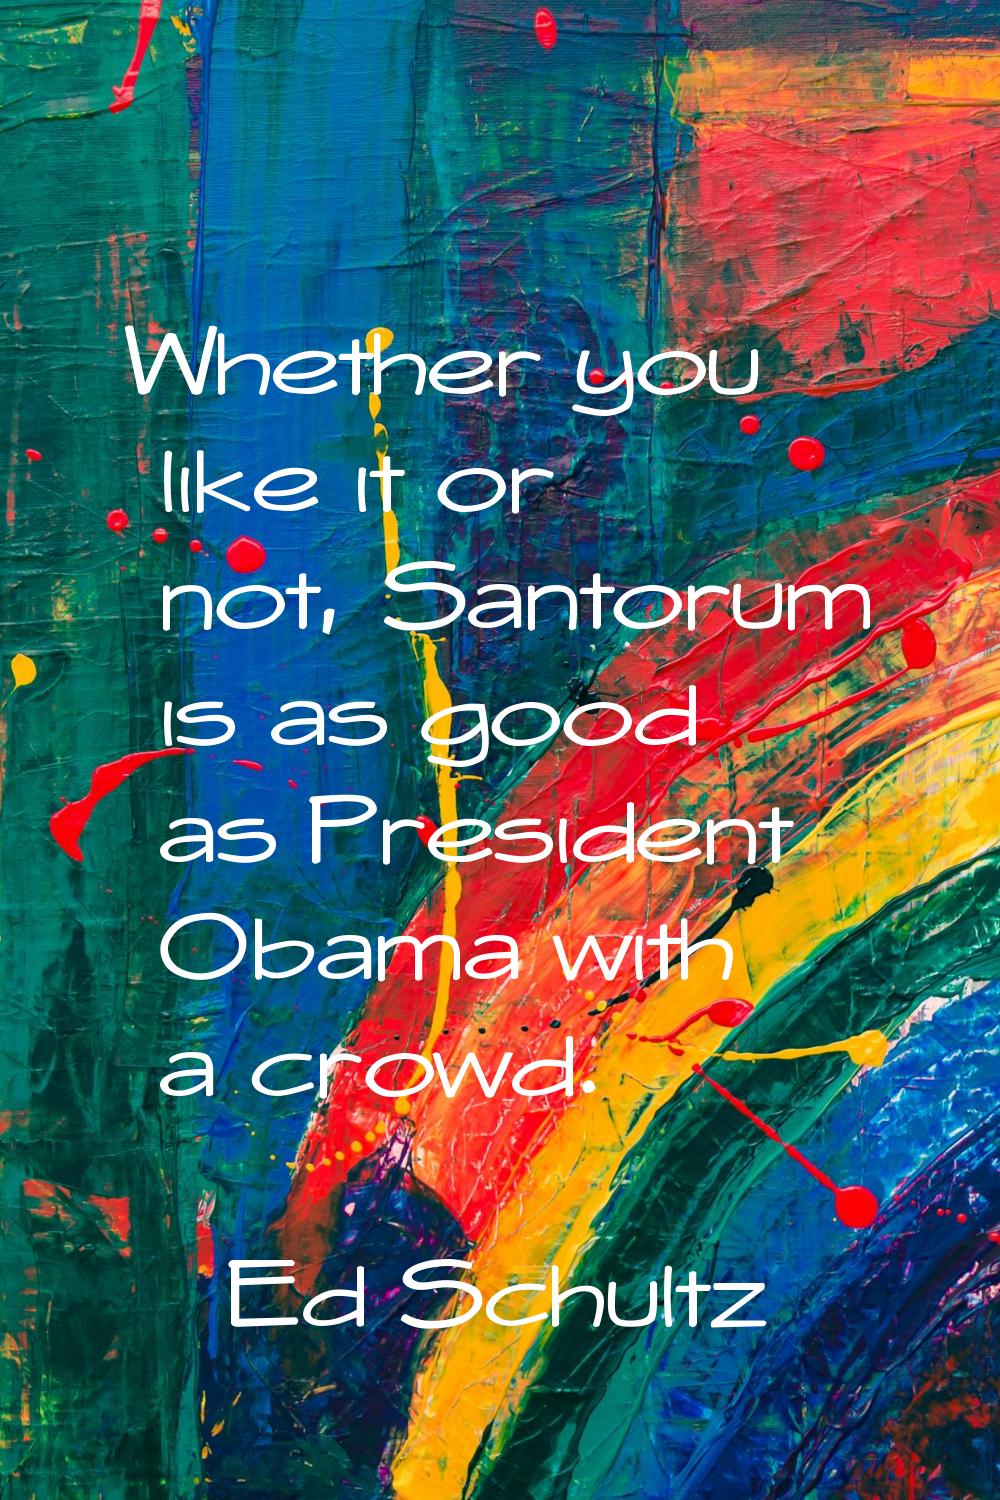 Whether you like it or not, Santorum is as good as President Obama with a crowd.